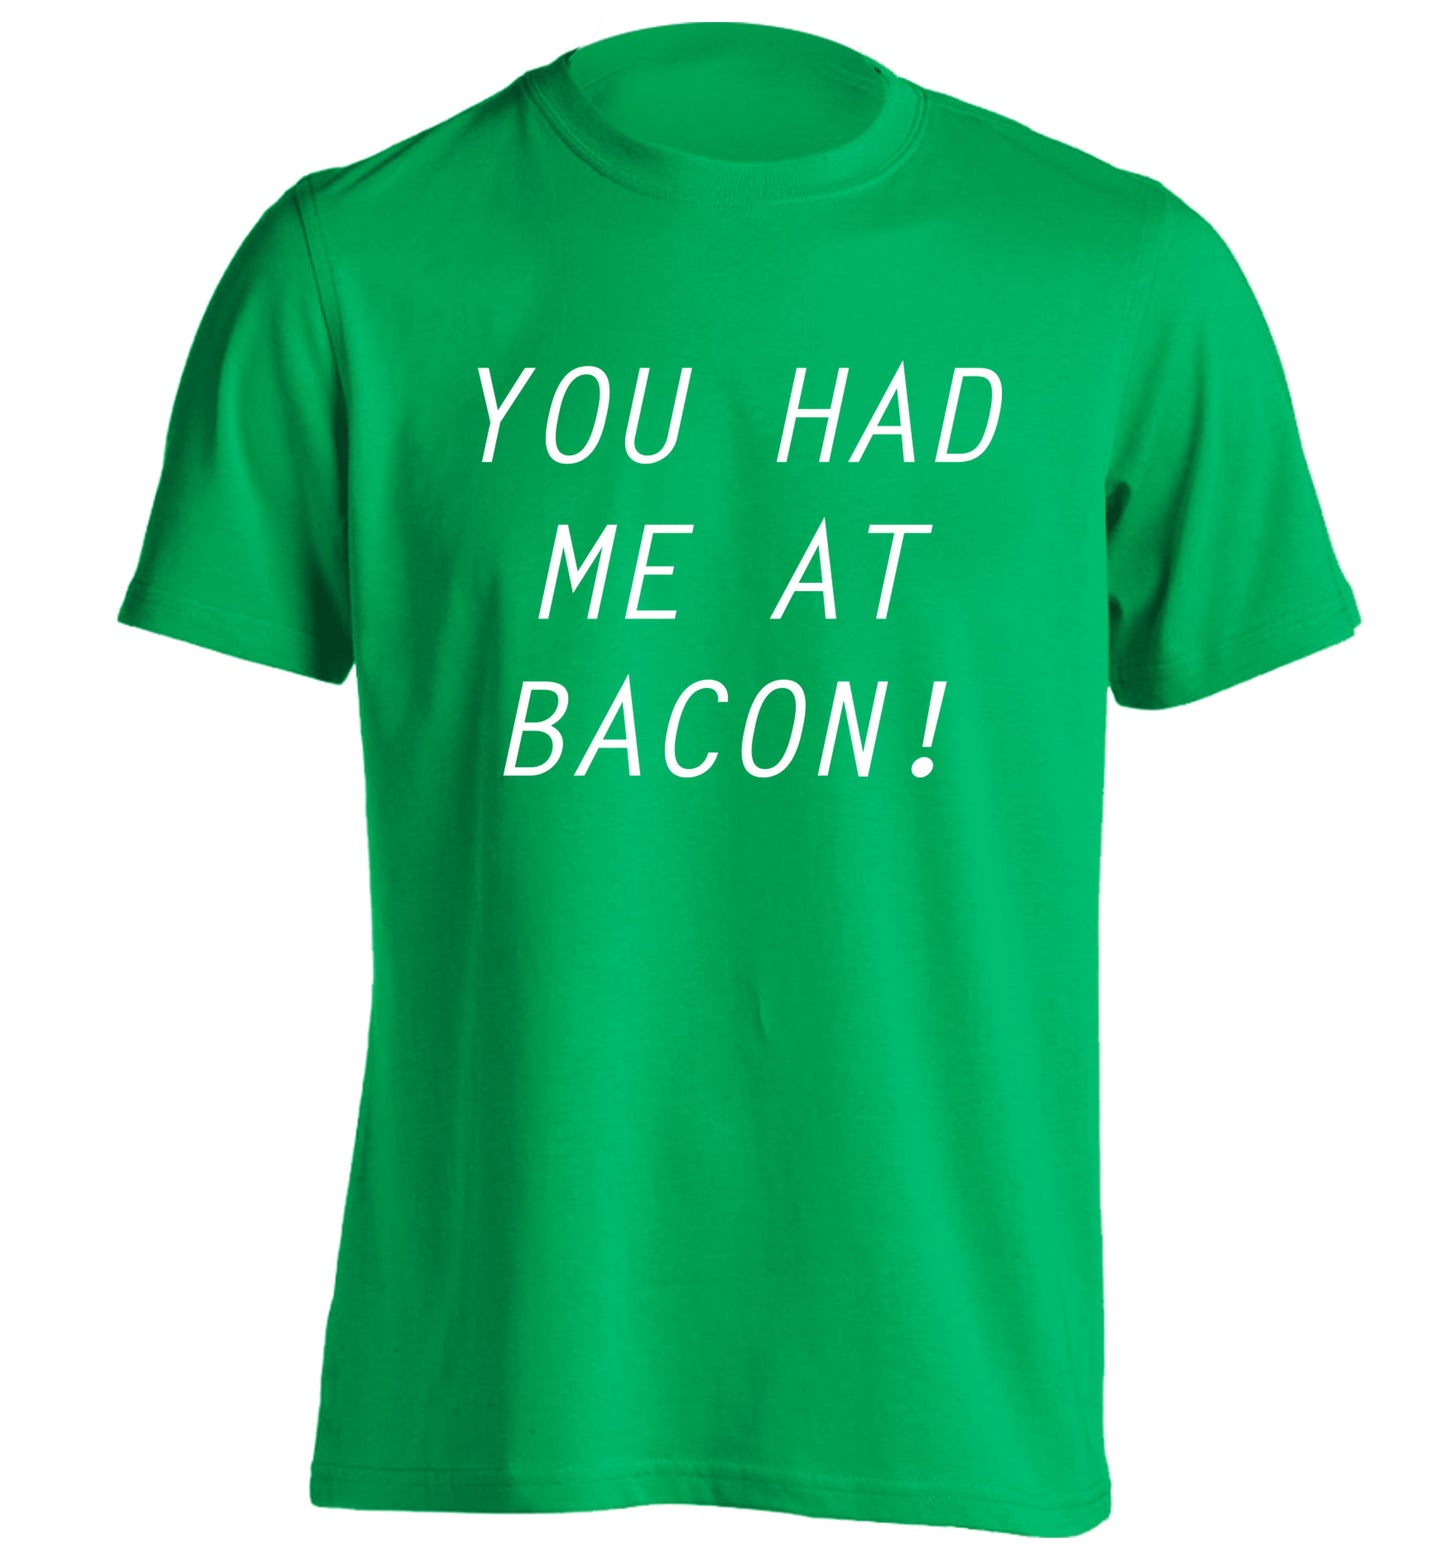 You had me at bacon adults unisex green Tshirt 2XL